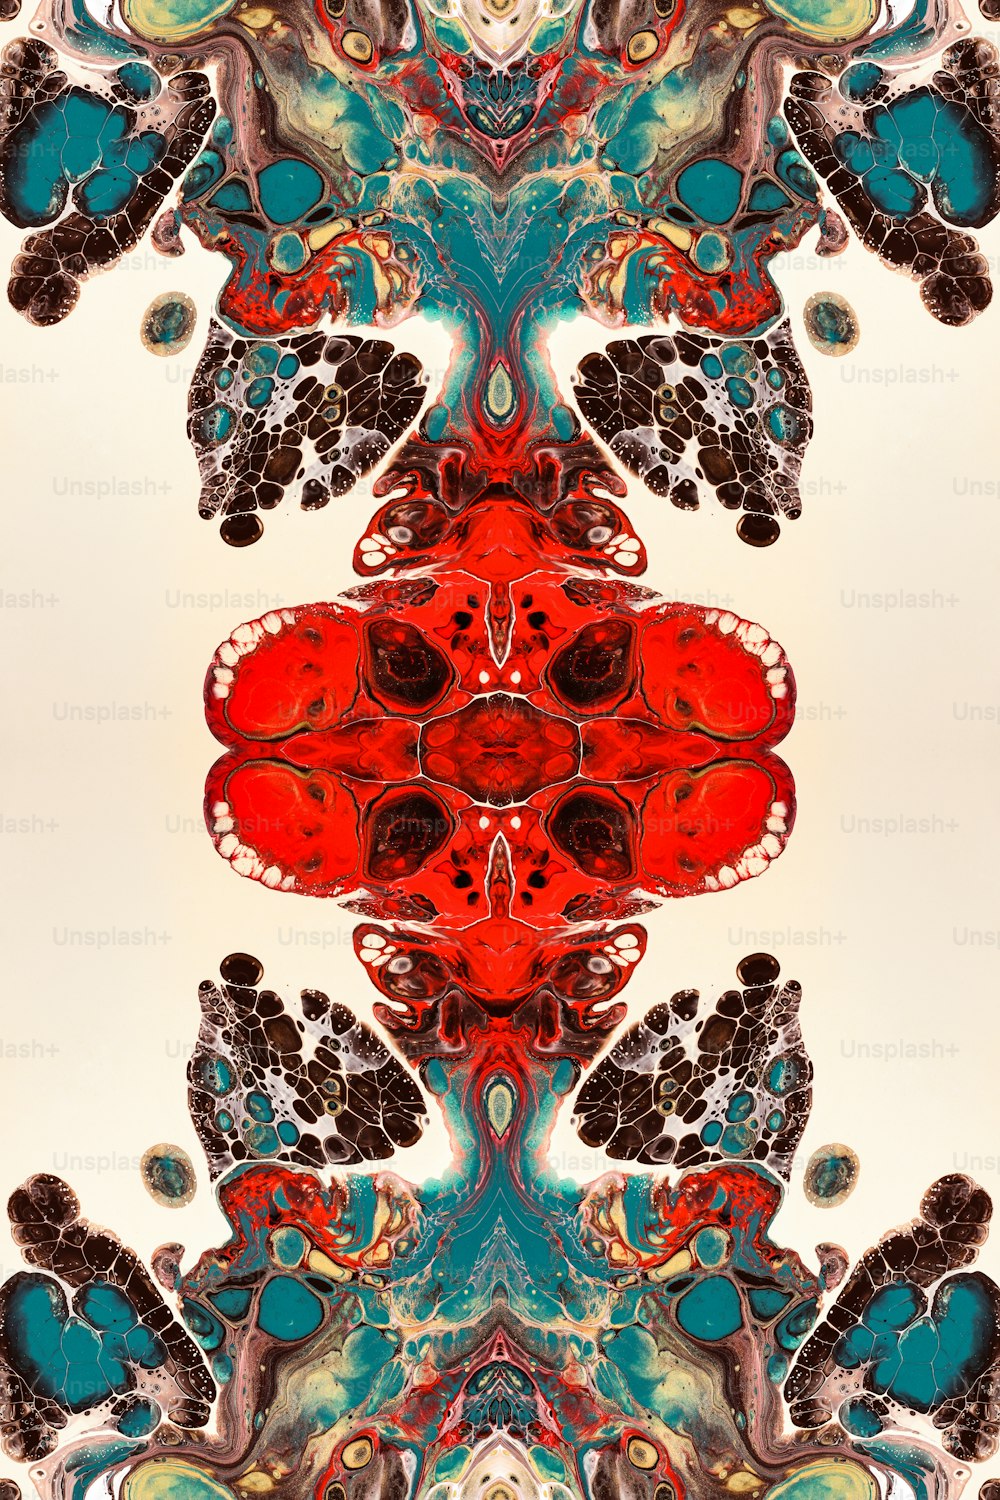 an abstract image of a red and blue flower